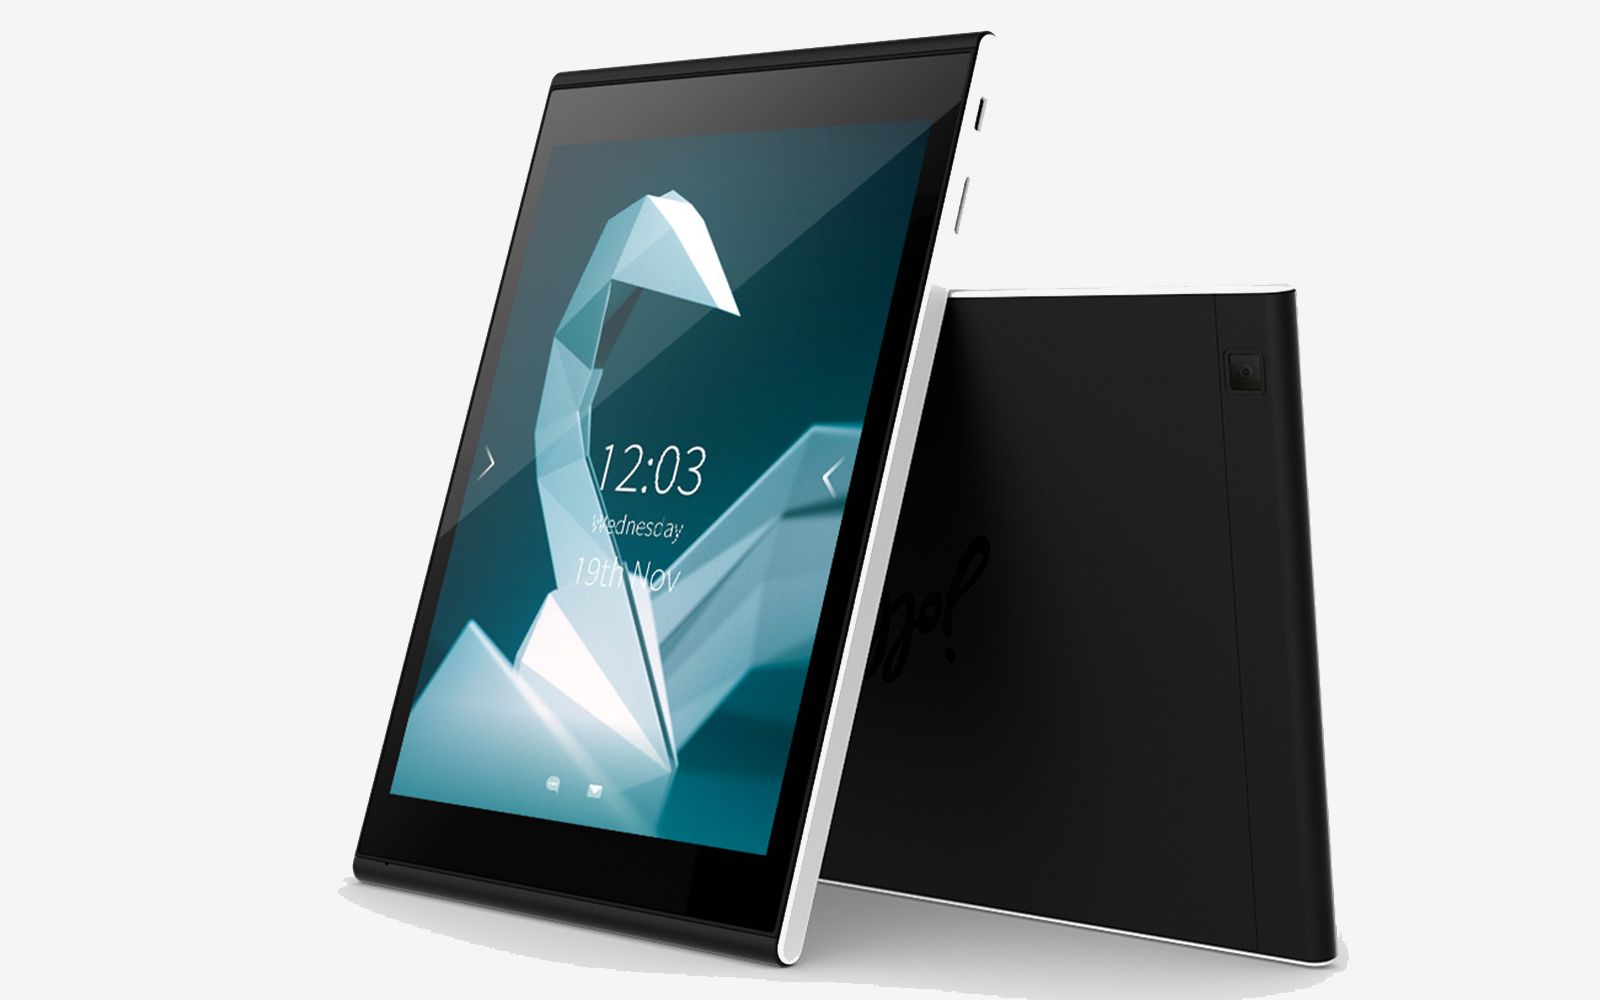 get ipad 3 mini and nokia n1 specs for 120 jolla tablet with sailfish os image 1